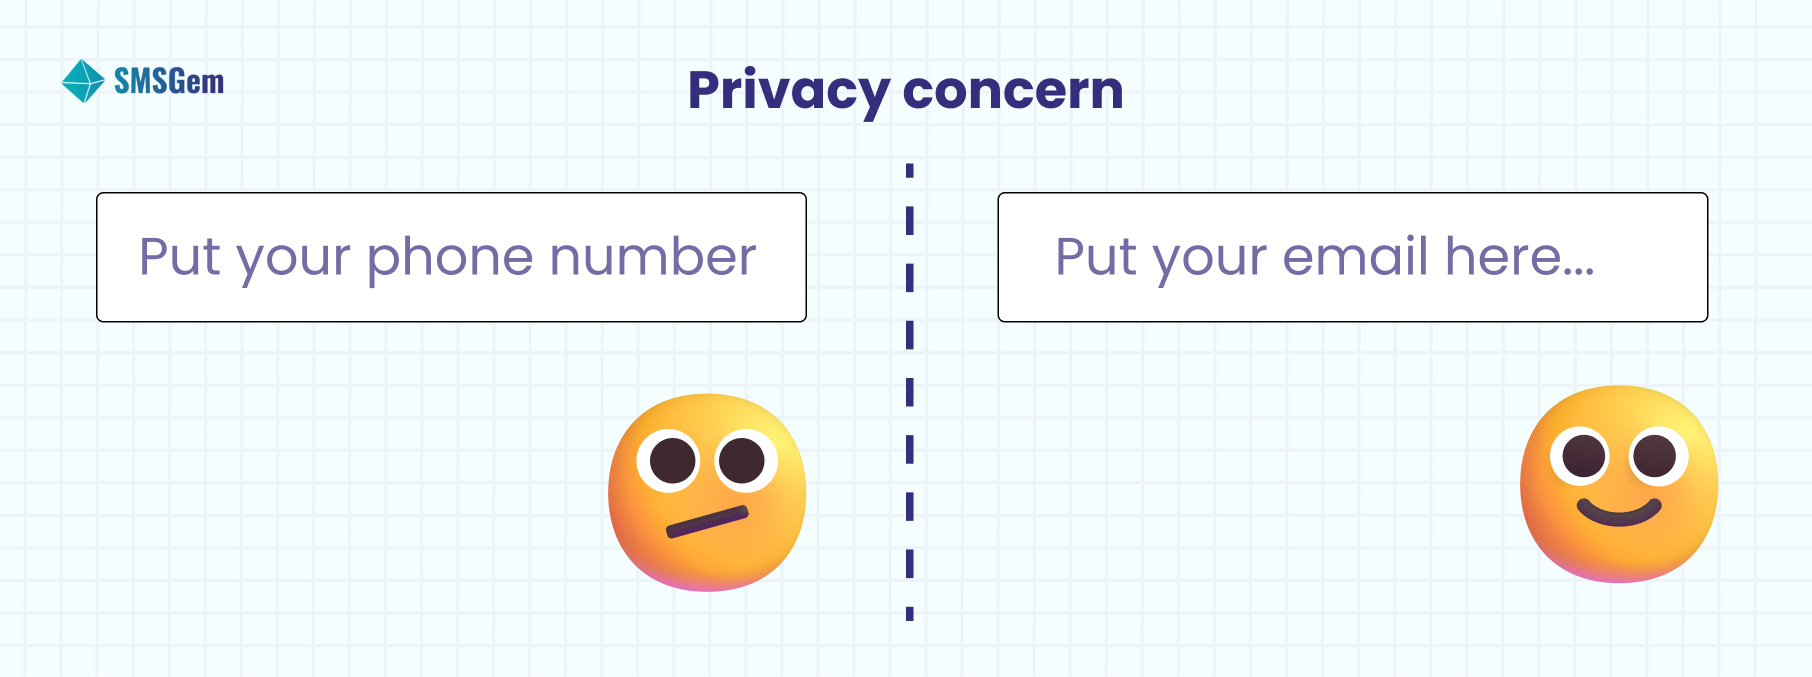 Email Marketing can solve SMS Marketing weakness: Privacy concern